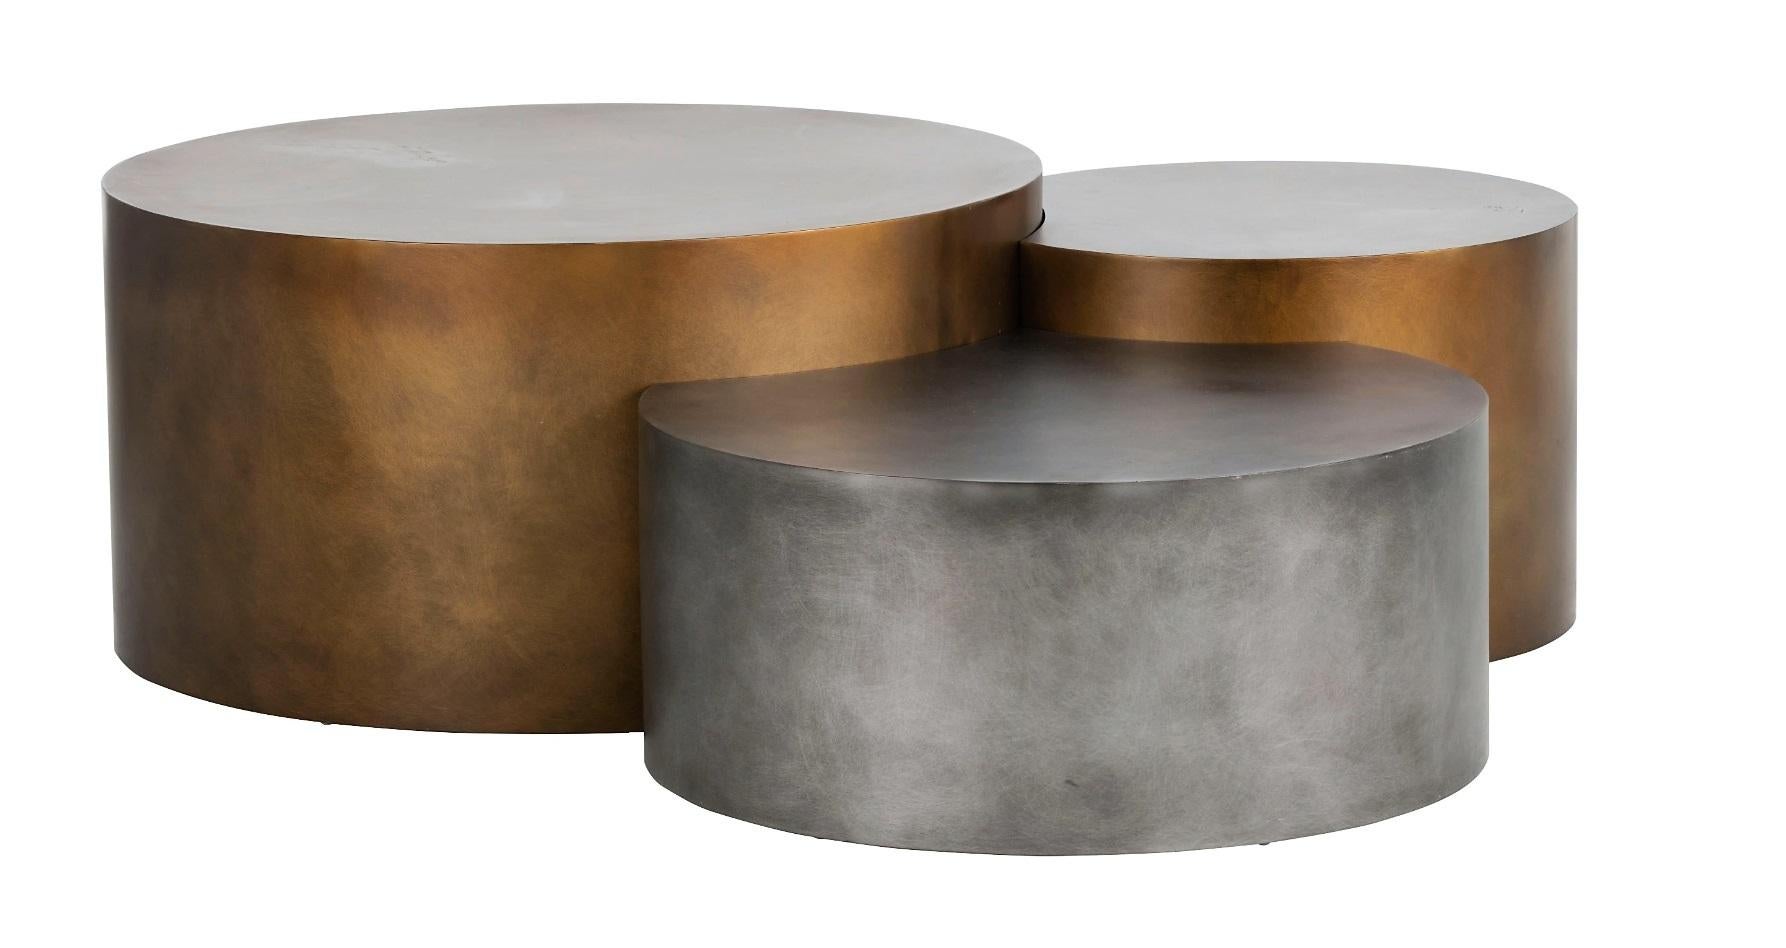 Asian Metallic Composition of Three Low Tables in Different Heights and Finishes